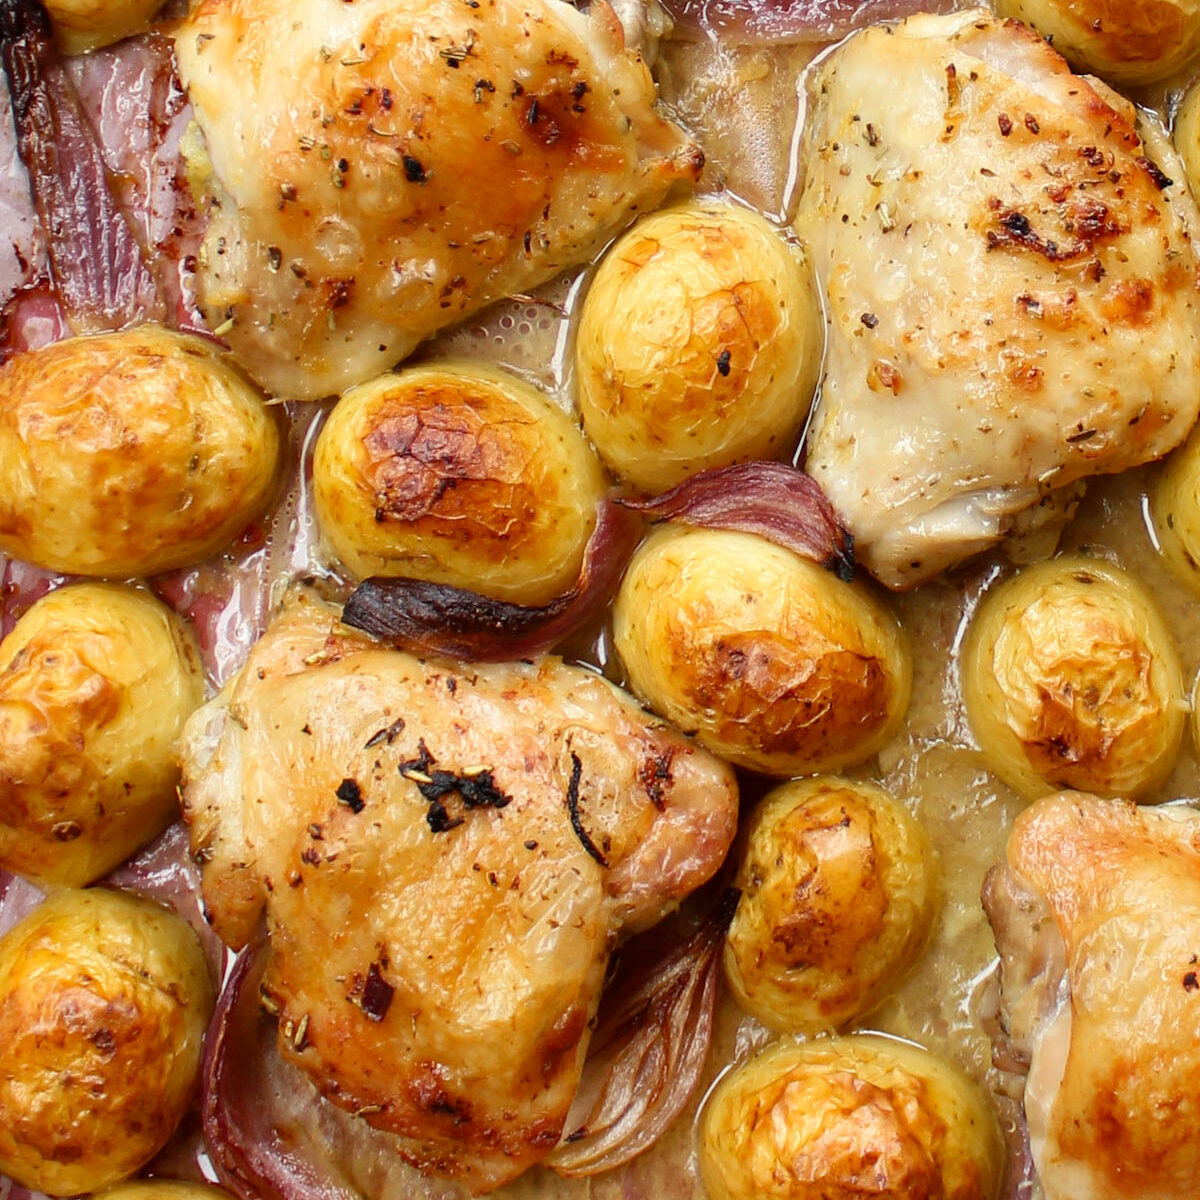 baked chicken and potatoes on a baking tray